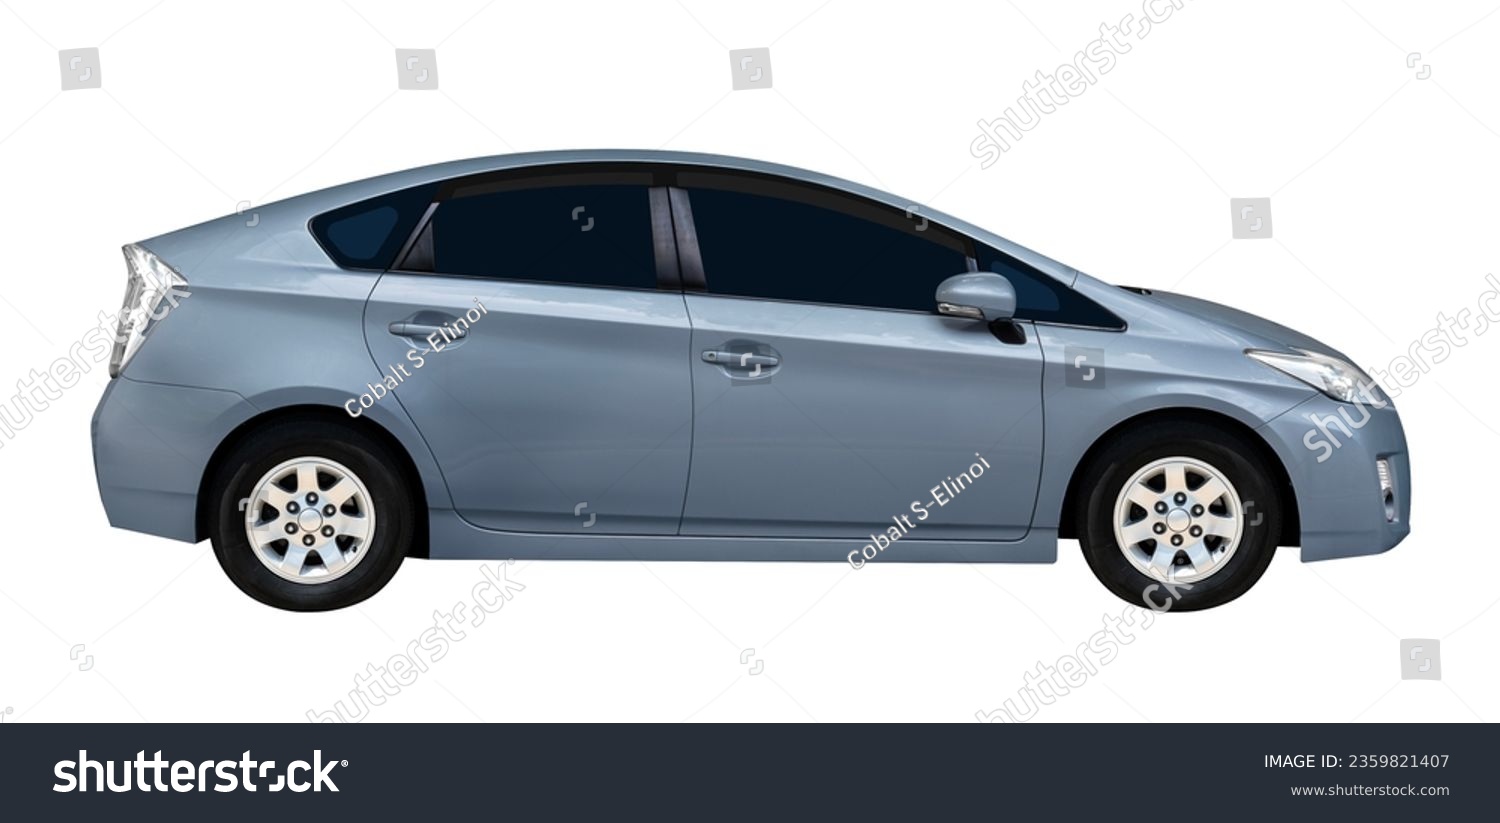 Side view gray hatchback car isolated on white background #2359821407